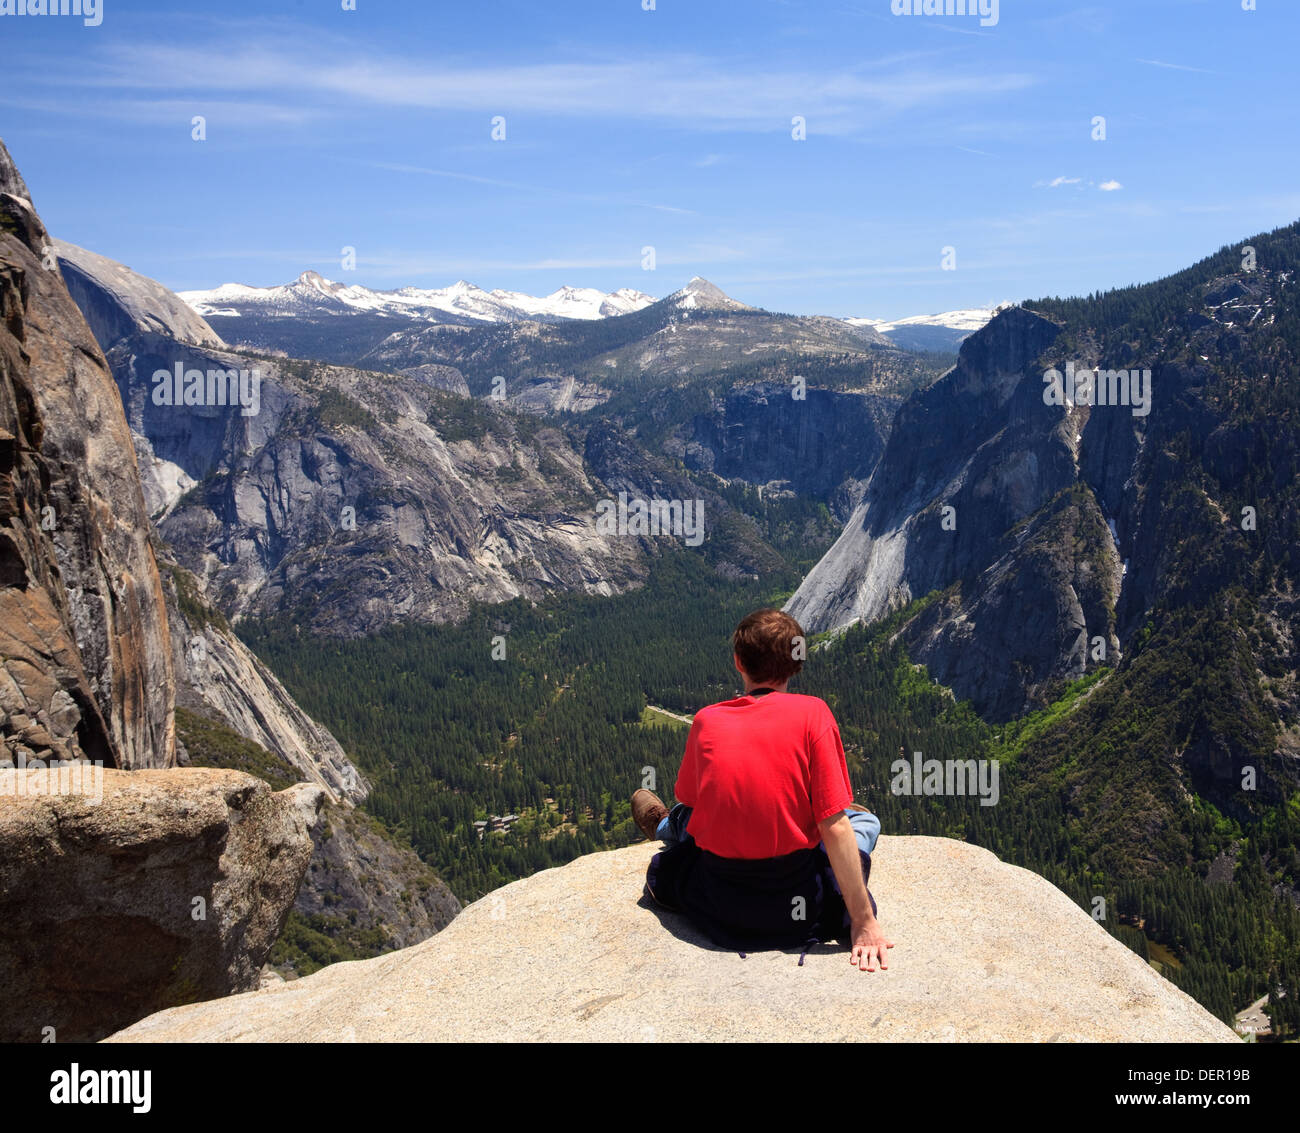 Hiker looking at the view from Yosemite Falls with Sierra Nevada mountains in Yosemite National Park, California, USA Stock Photo